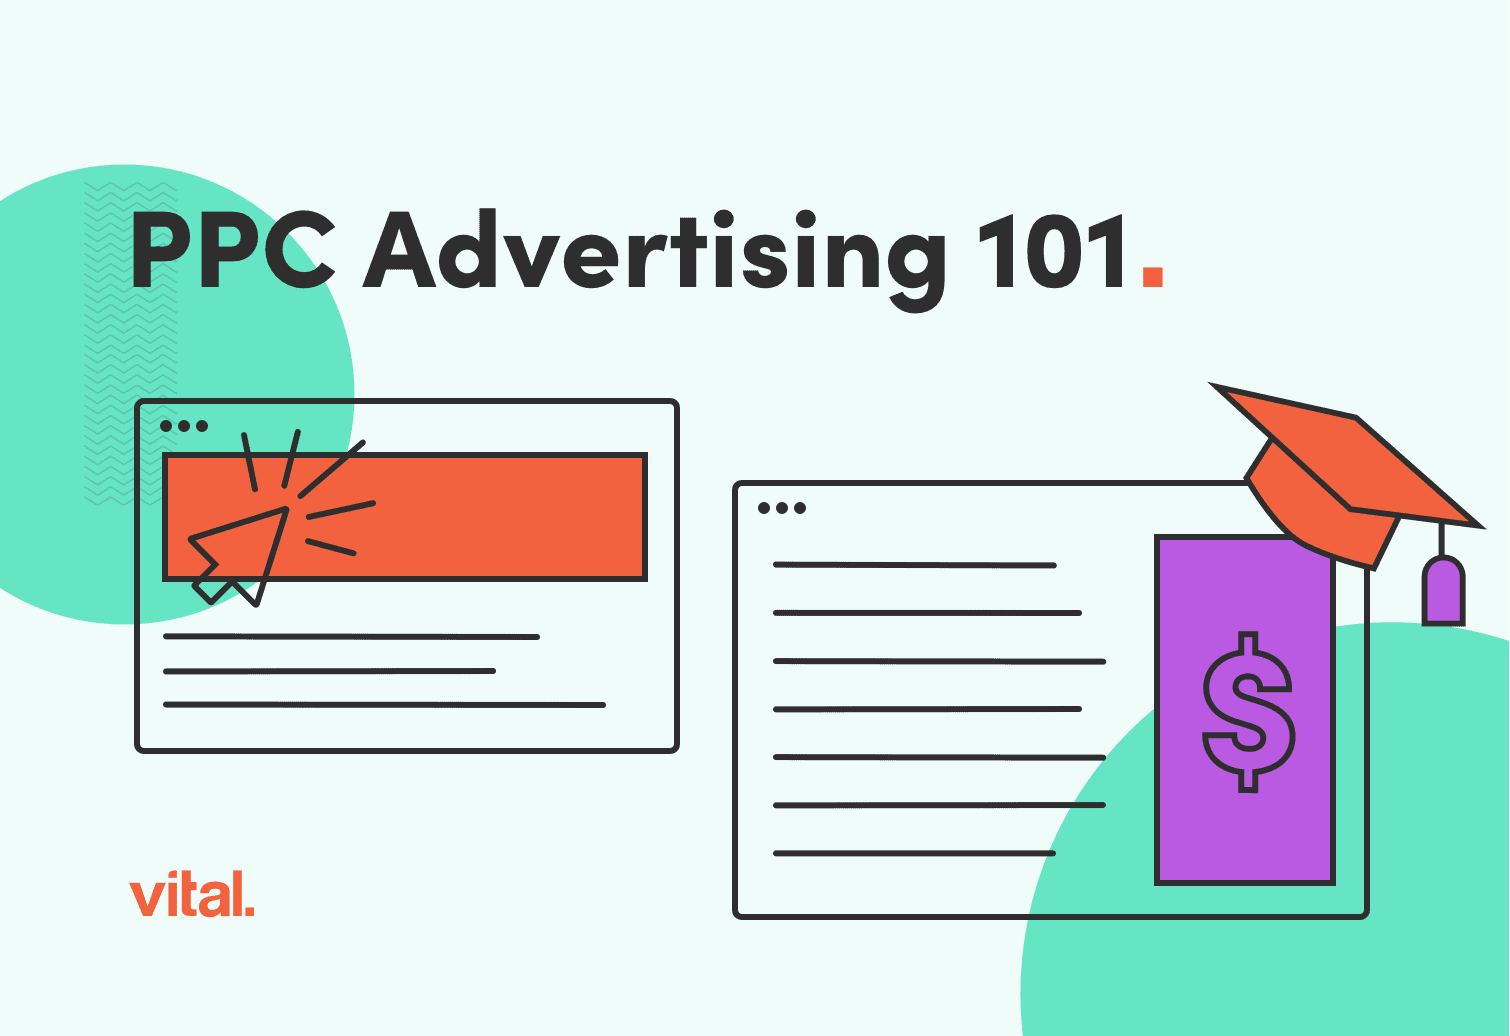 text "PPC advertising 101" floats over an illustration of a webpage being clicked